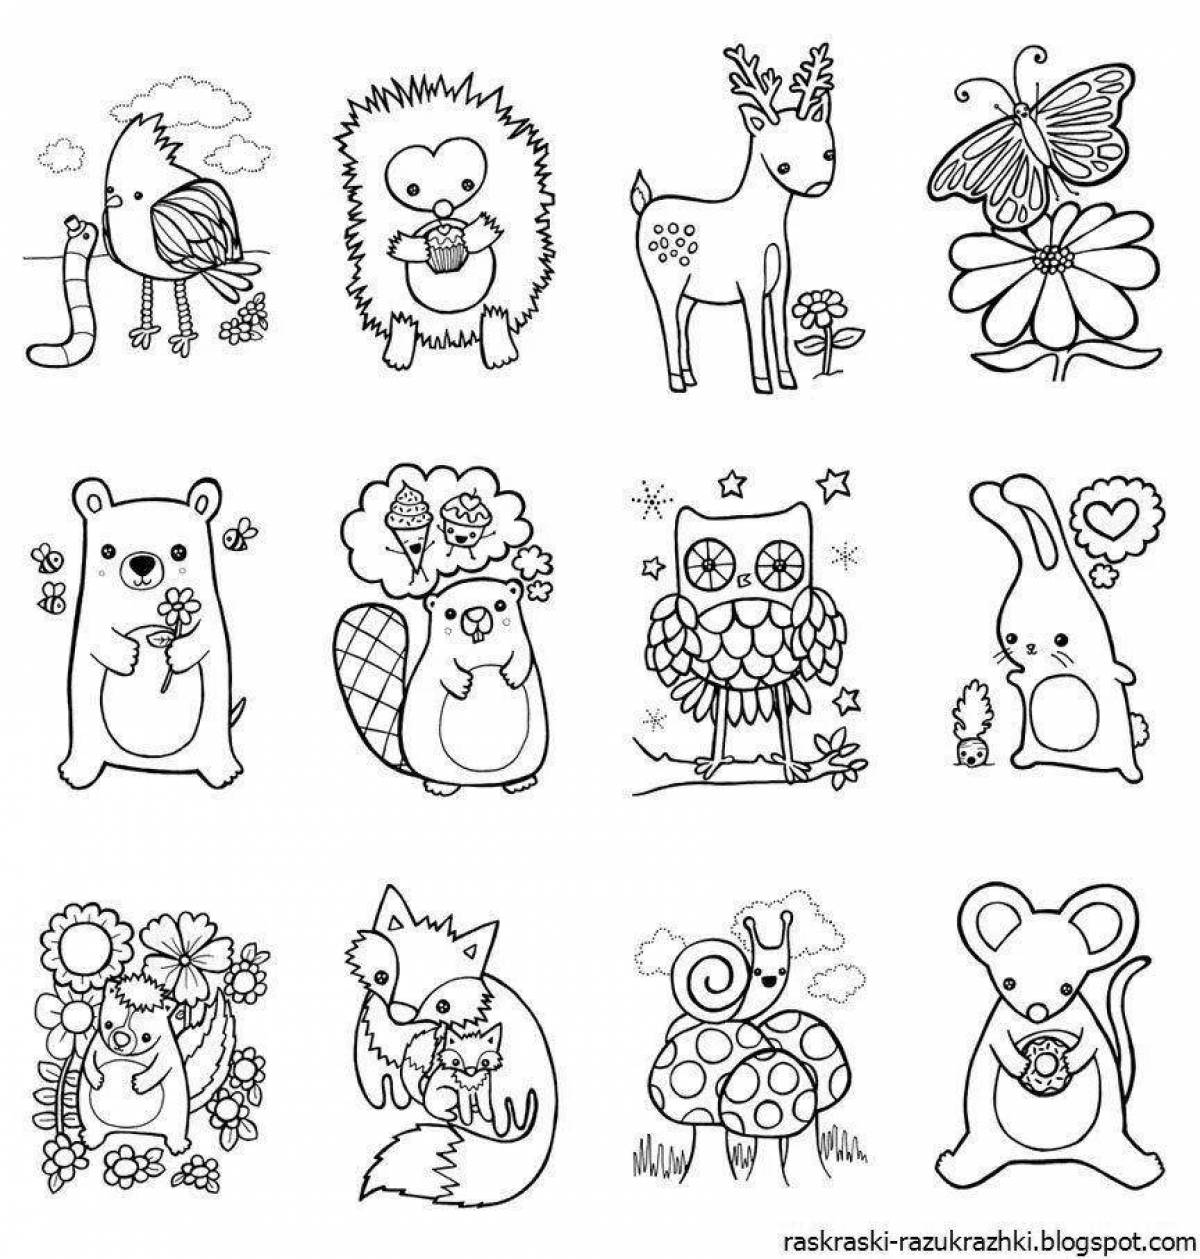 Fabulous sticker coloring pages